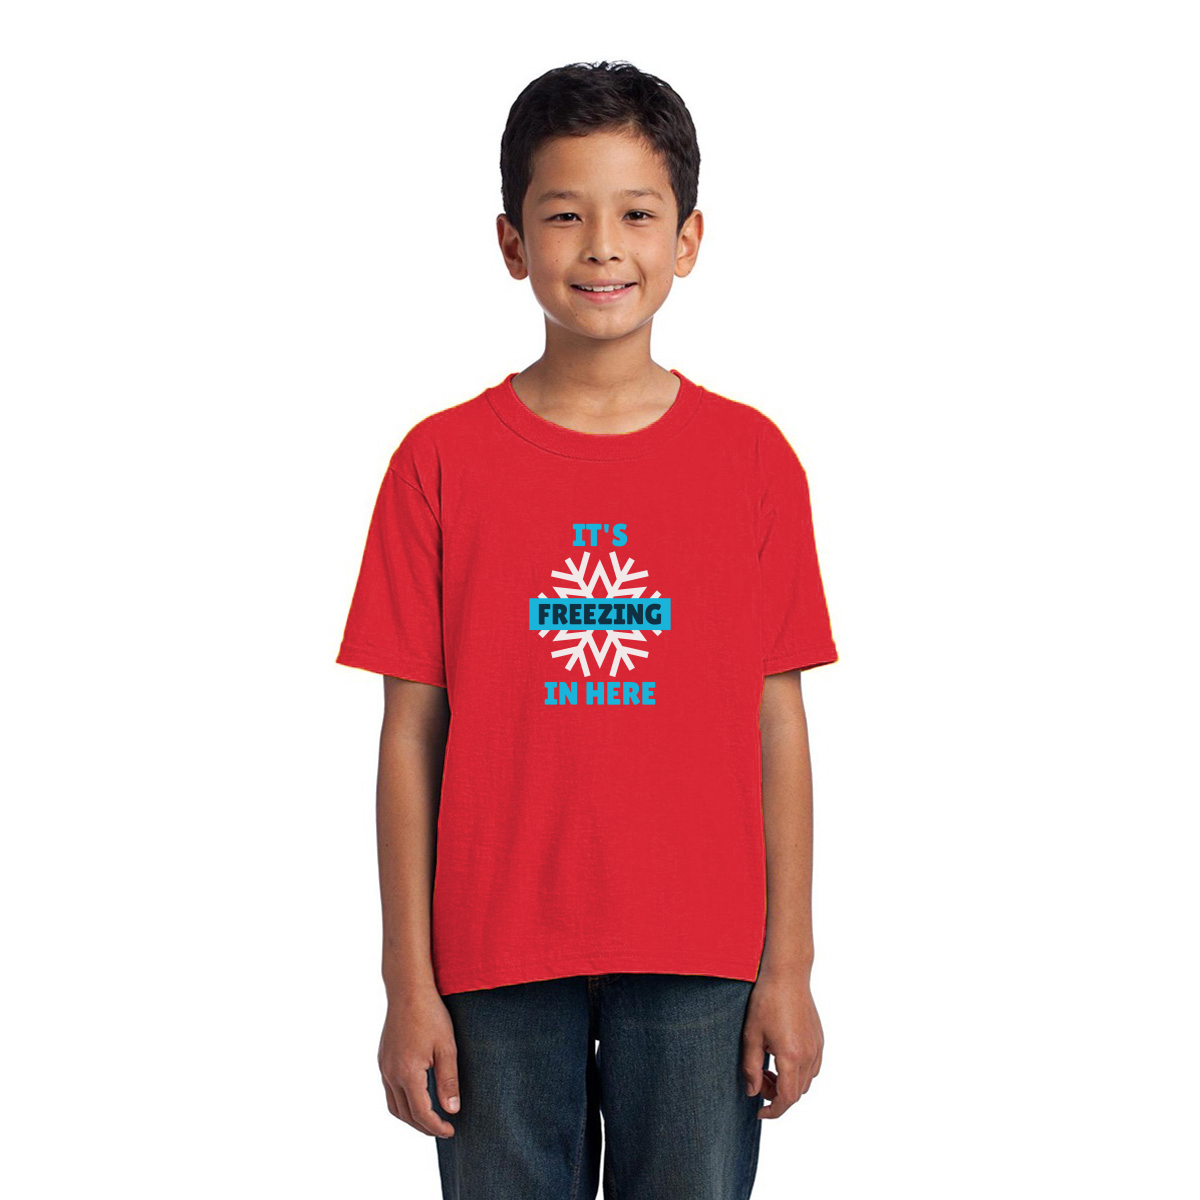 It's Freezing In Here! Kids T-shirt | Red